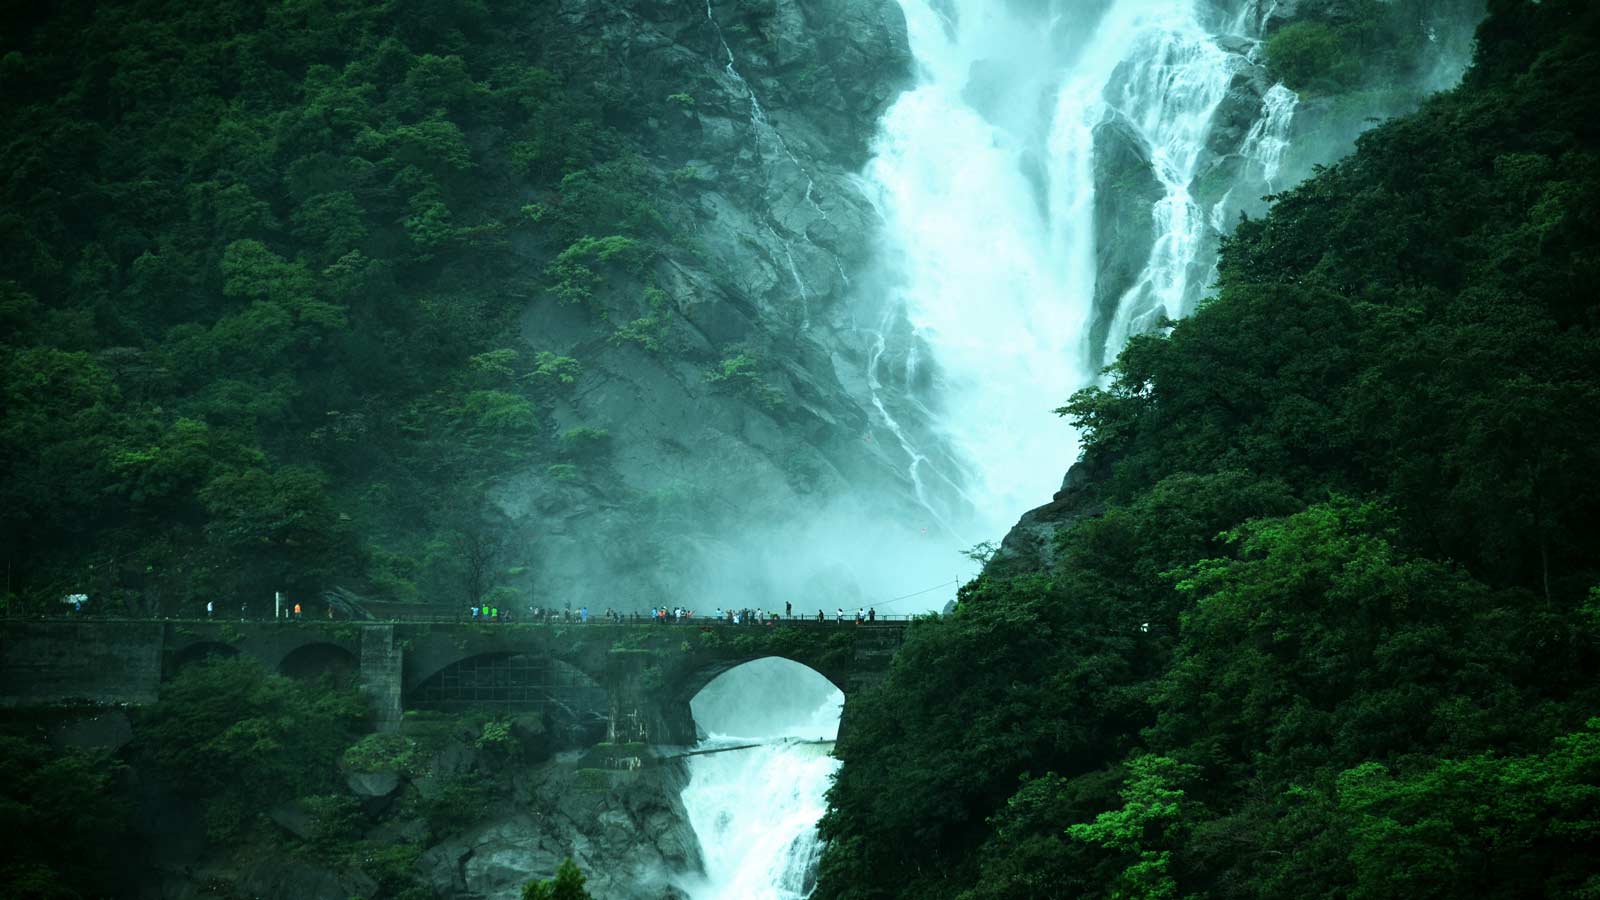 <p><span>Dudhsagar Falls, one of India’s tallest and most impressive waterfalls, cascades over 1,000 feet in four tiers and spans nearly 100 feet in width. The water’s speed and force create a “sea of milk” illusion as it plunges into the Mandovi River. </span></p><p><span>Located in Goa’s Bhagwan Mahaveer Sanctuary, the falls are about 37 miles from Panjim and 28 miles from Margao.</span></p>